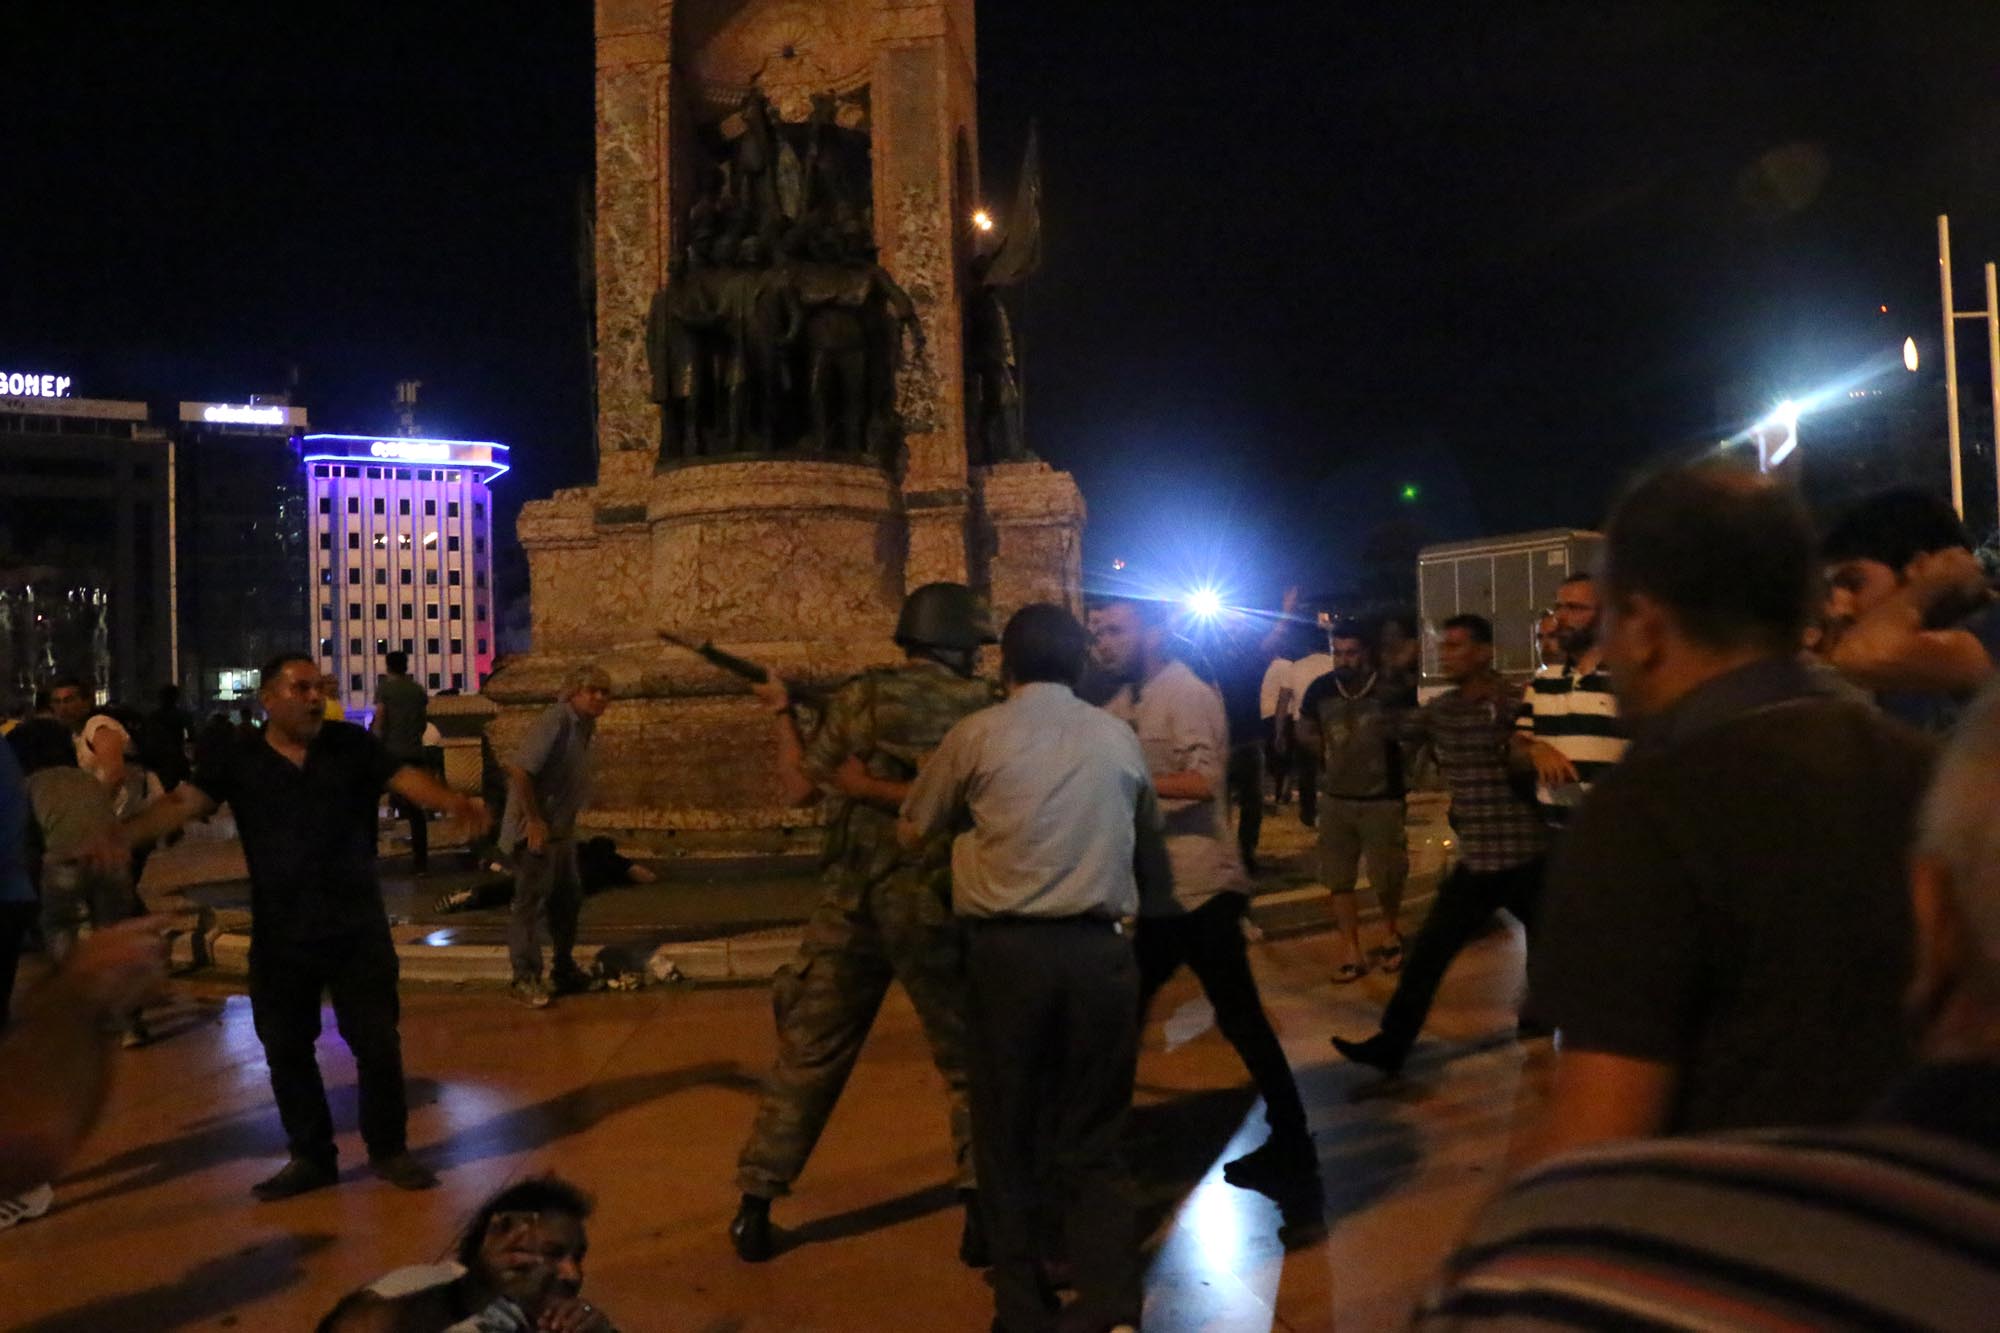 After police arrived at the square, coup soldiers fired into the air and the crowd dispersed.